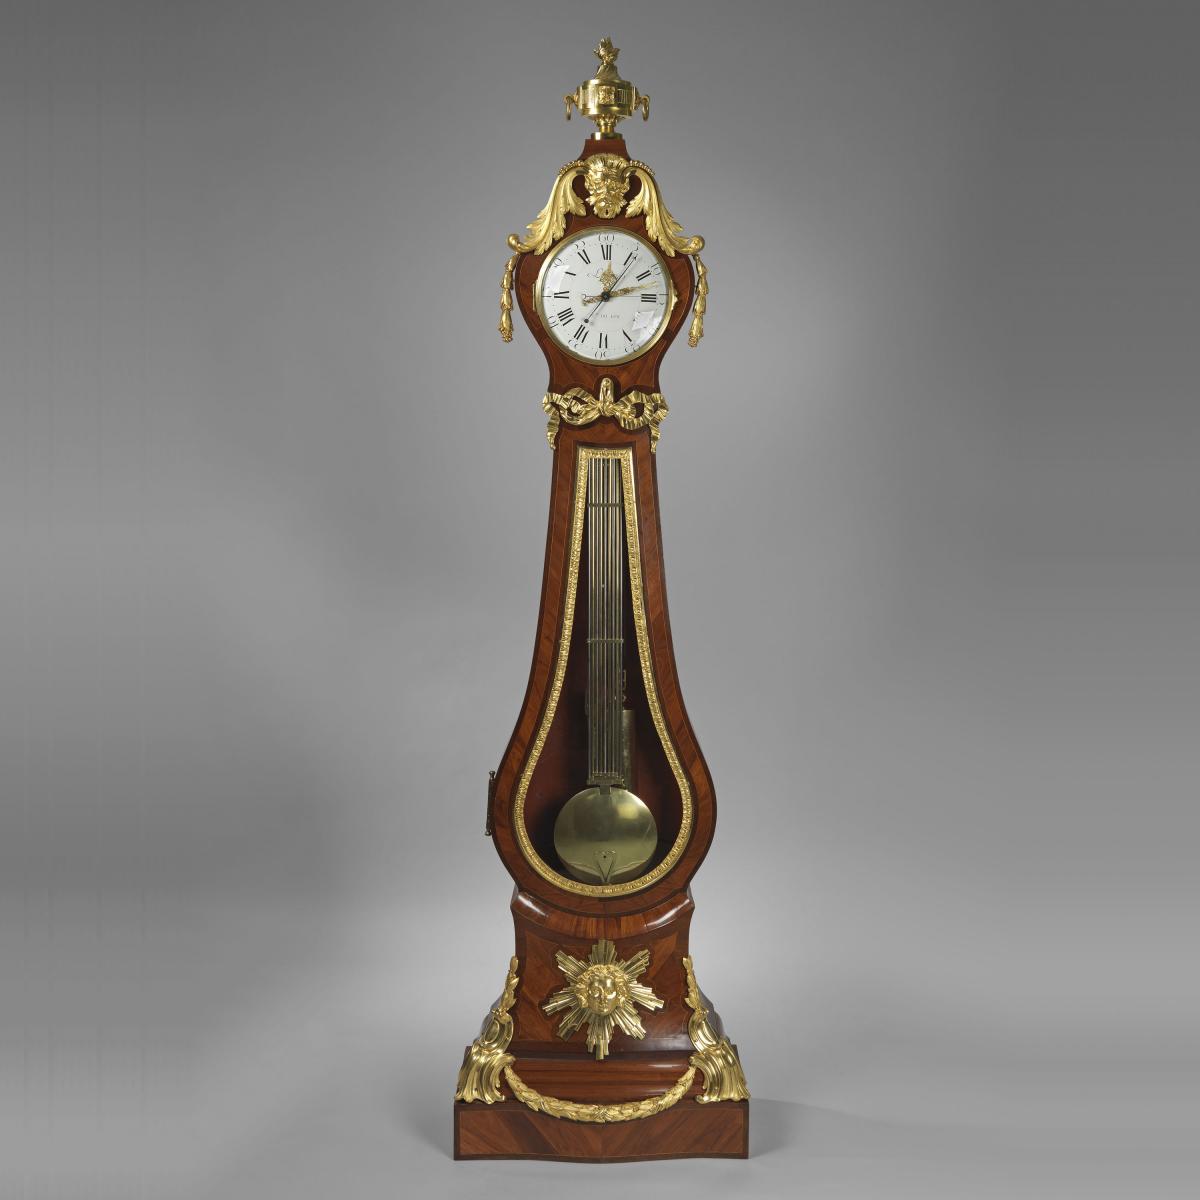 A Late Louis XV Ormolu-Mounted Tulipwood and Amaranth Regulateur de Parquetthe Movement by Jean-Andre Or Jean-Baptiste Lepaute, The Case by Nicolas Petit .Circa 1770